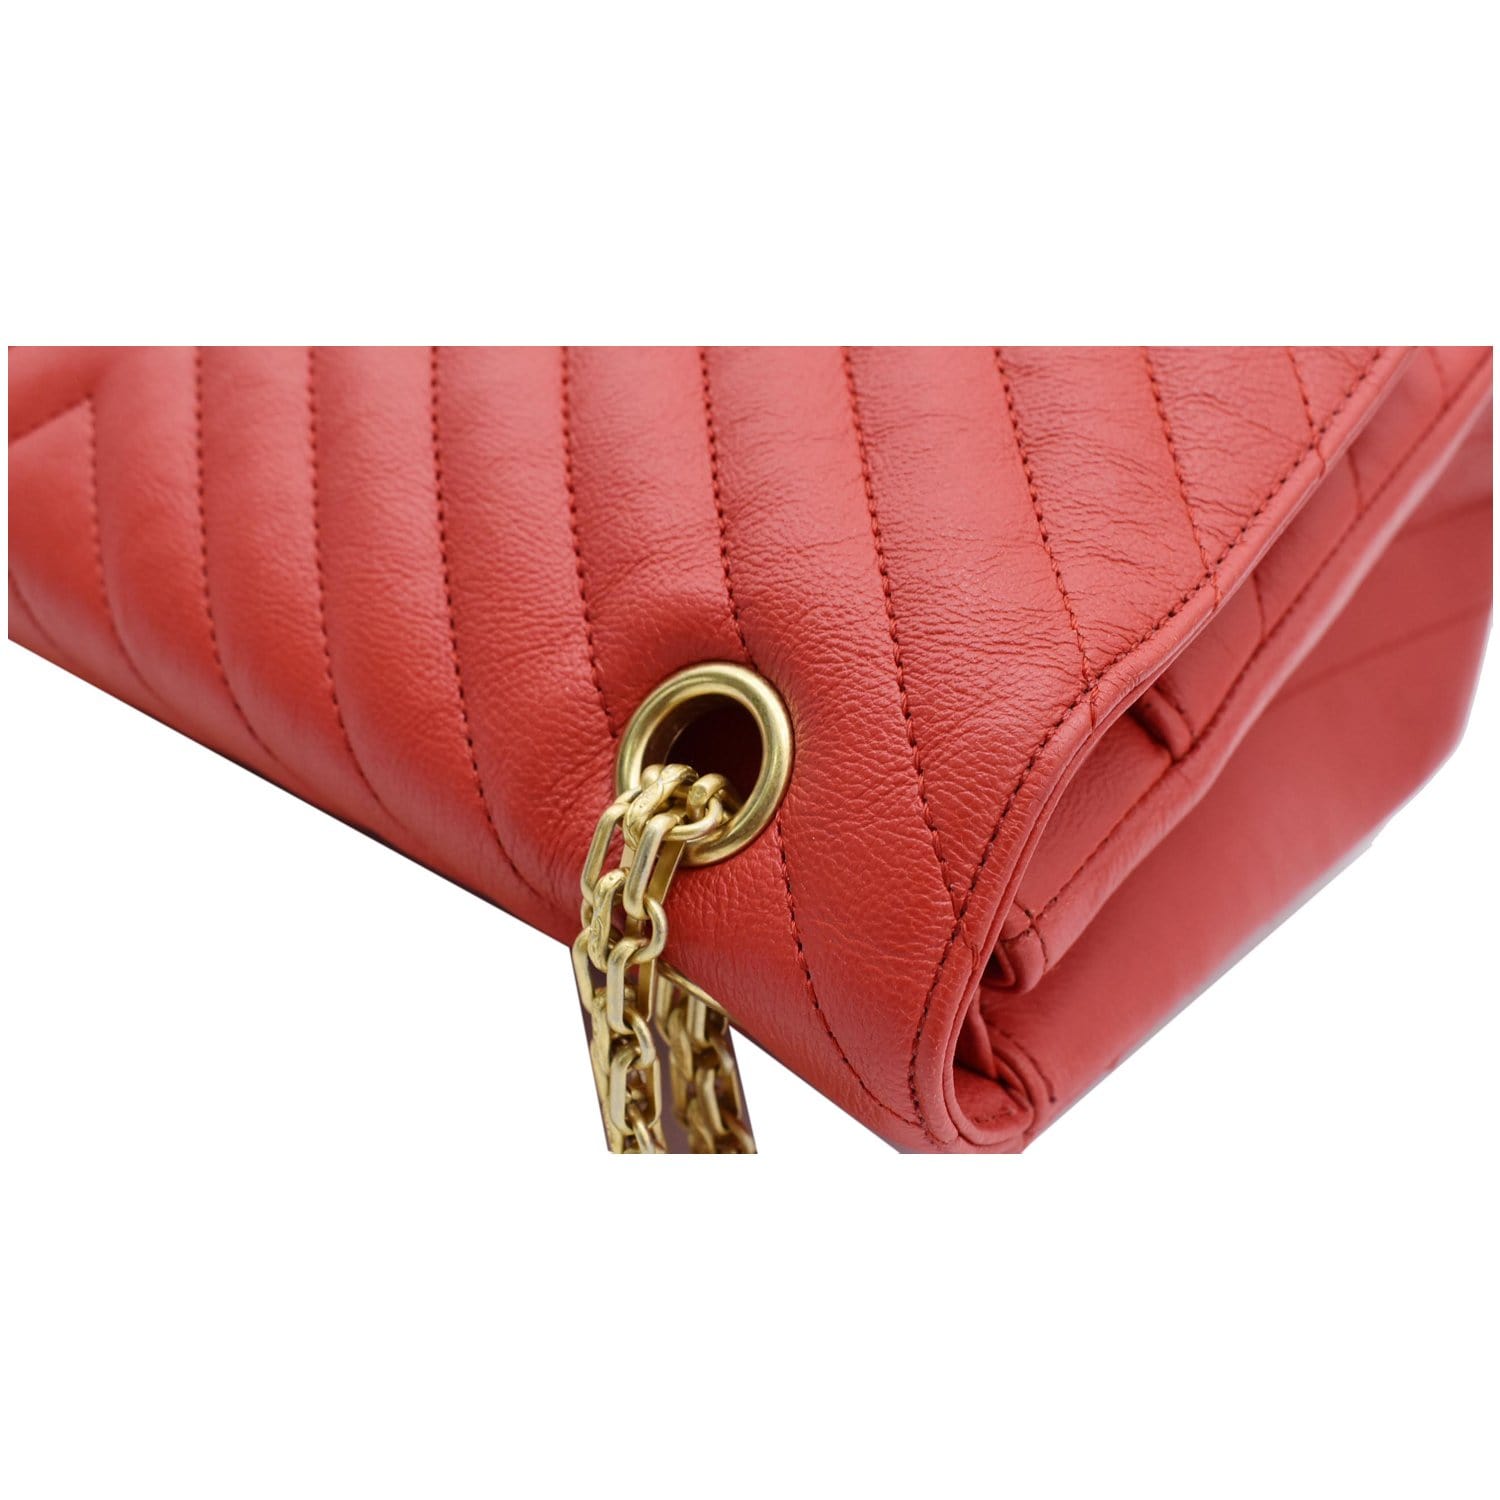 red chanel bag with gold hardware